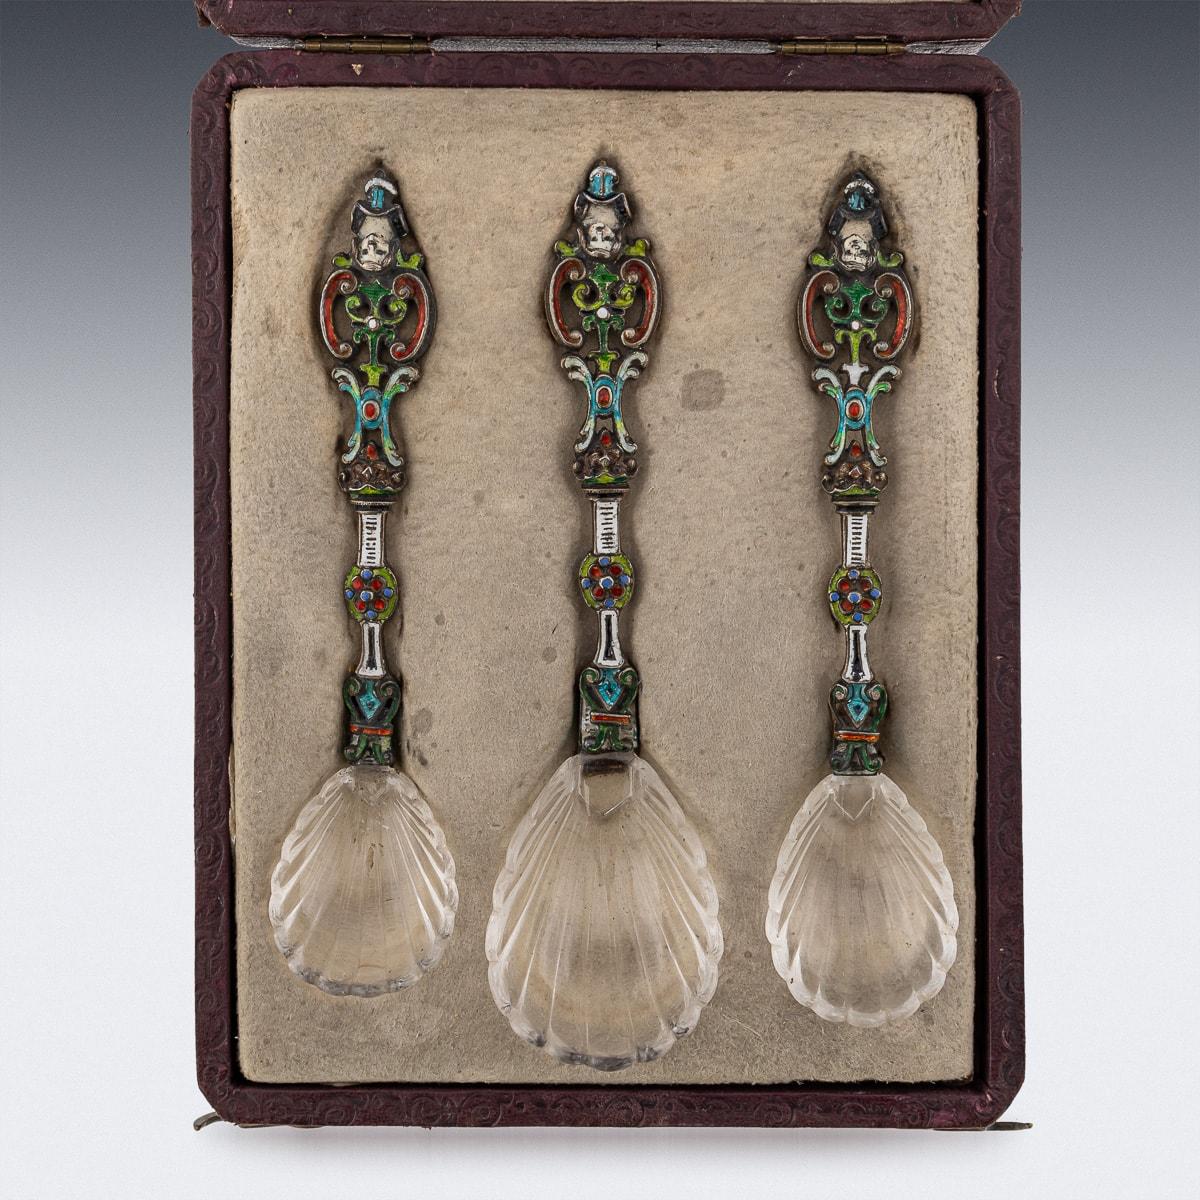 Antique 19th Century Austrian Silver, Enamel & Rock Crystal Spoons c.1880 In Good Condition For Sale In Royal Tunbridge Wells, Kent